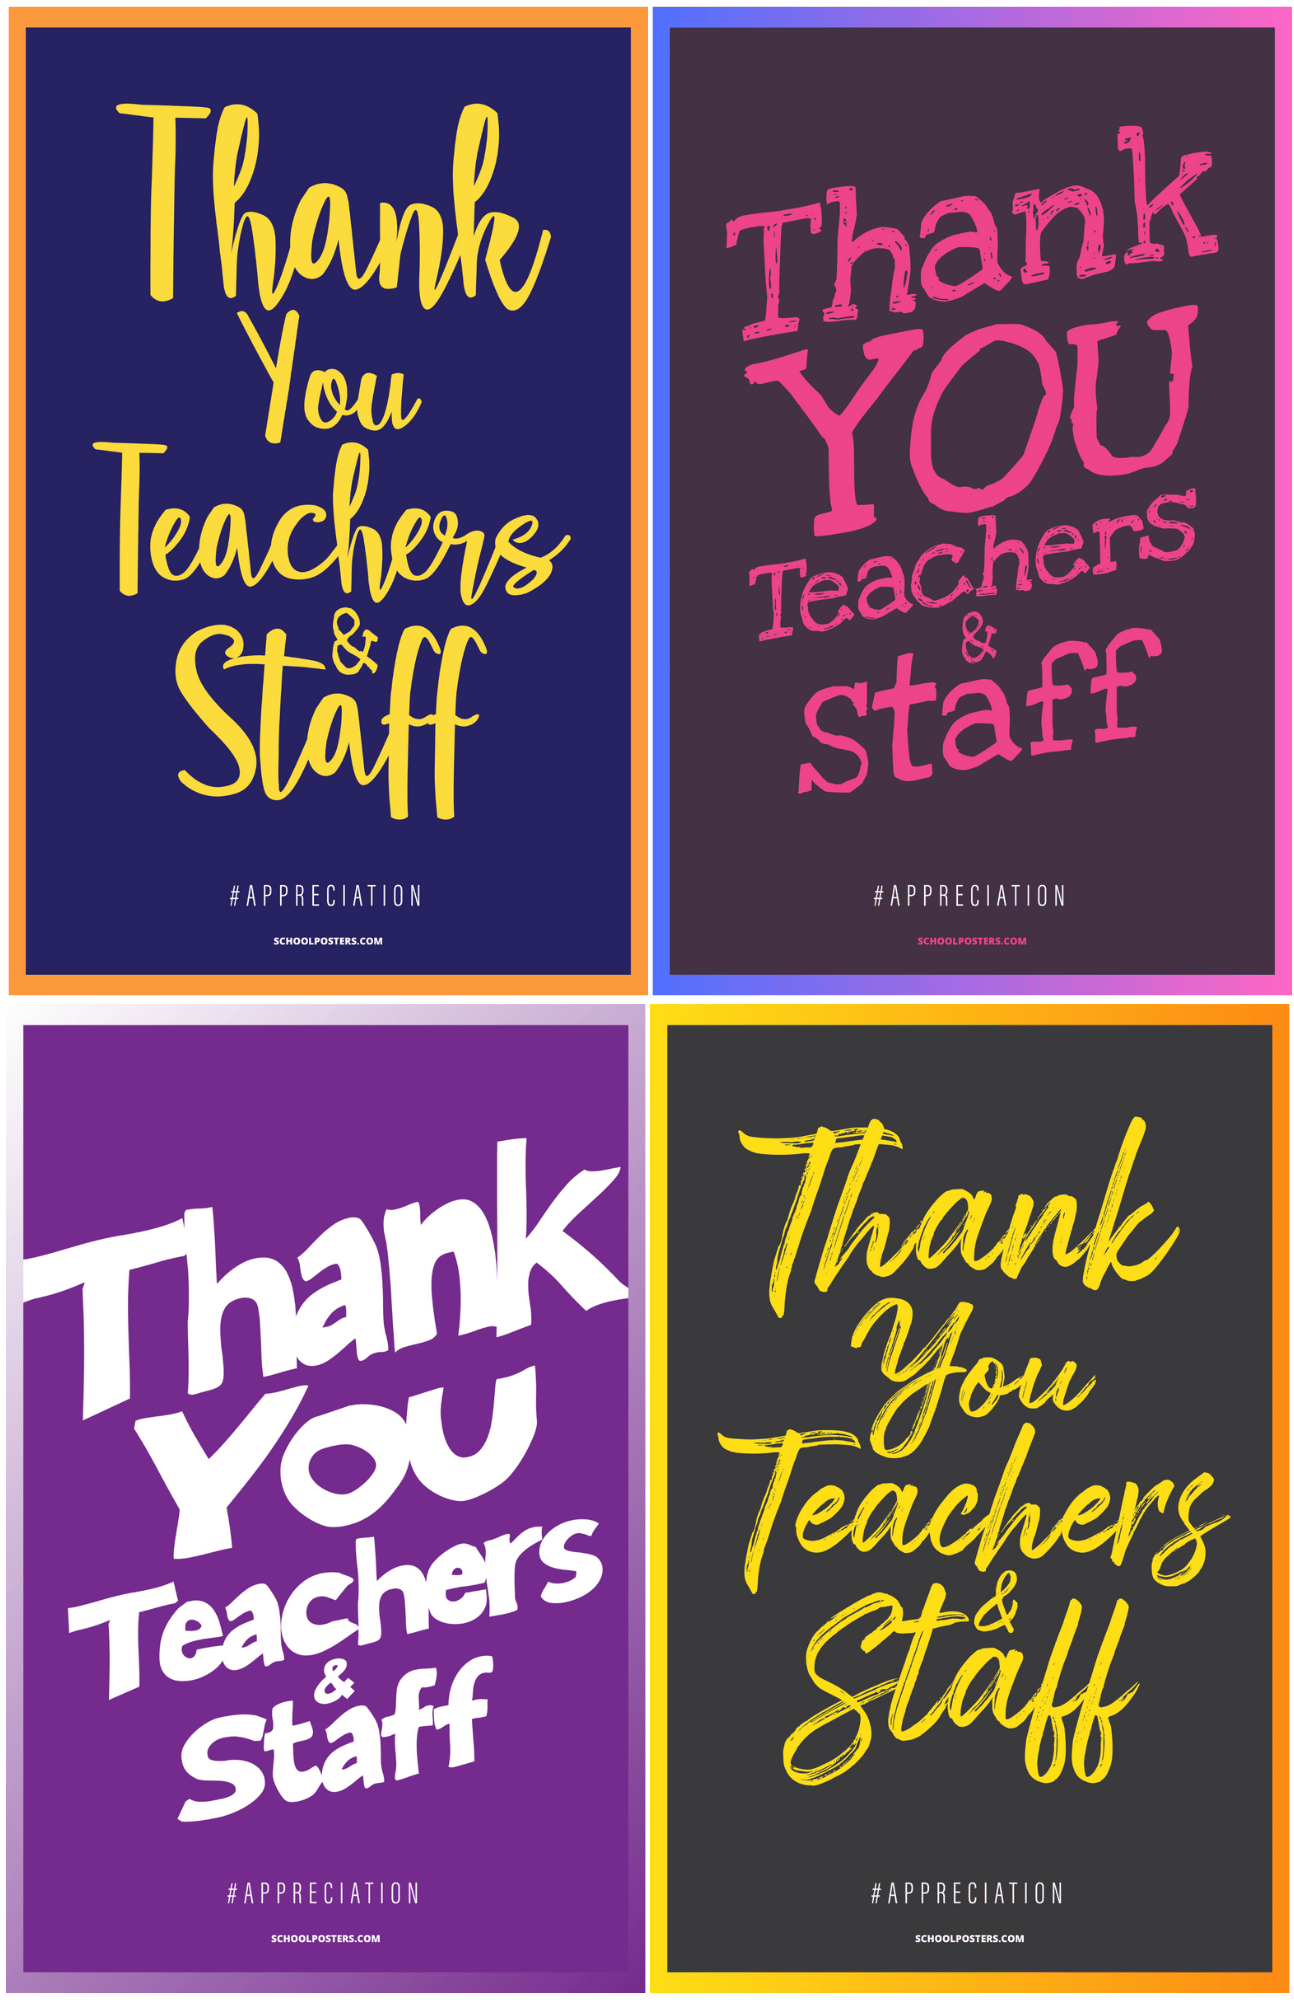 Thank You Teachers & Staff Poster Package